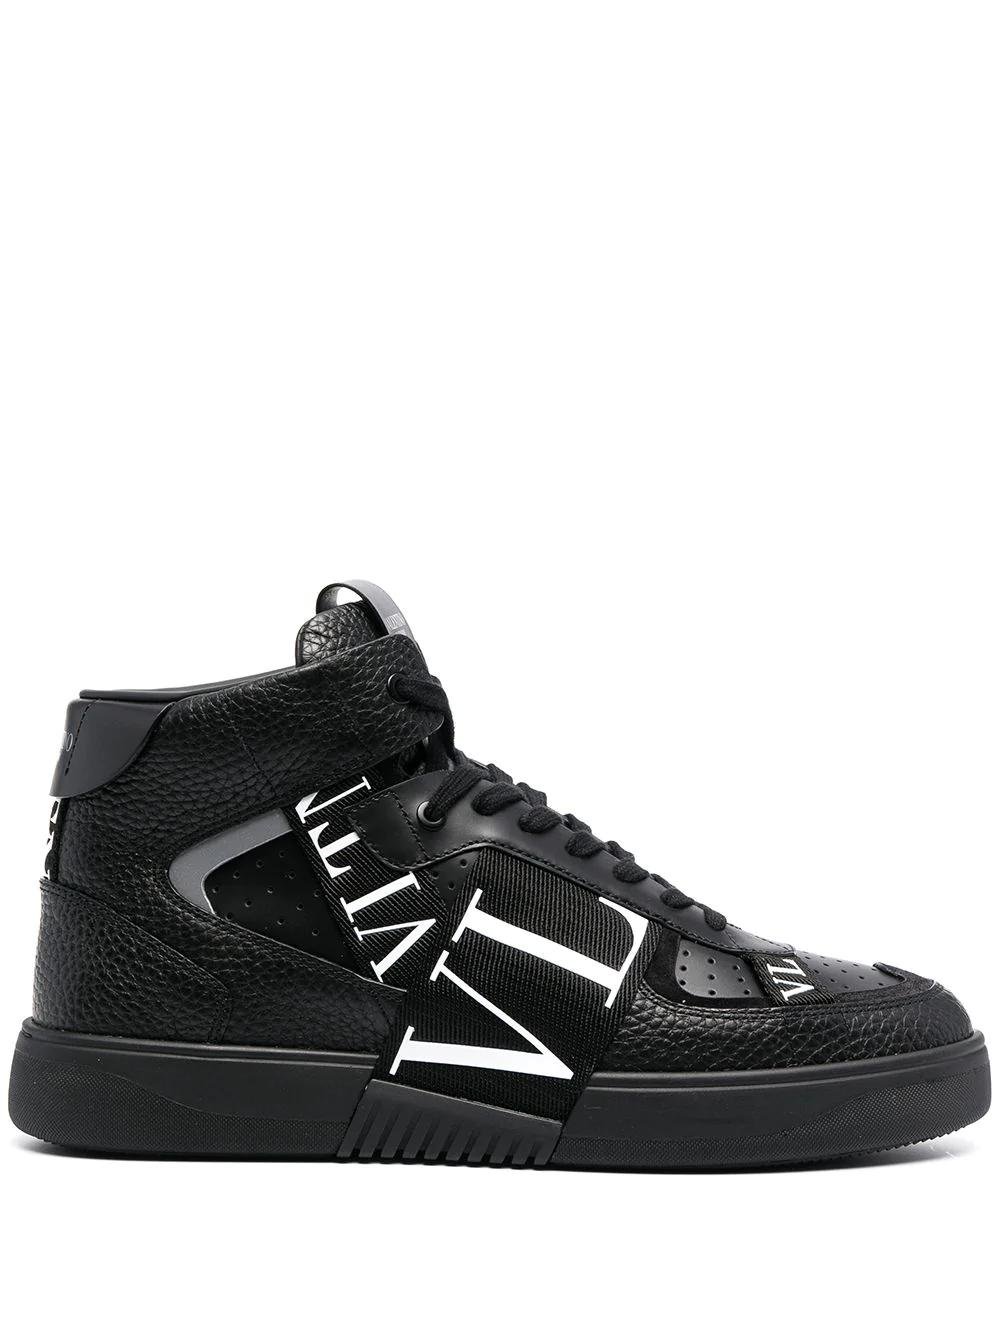 VL7N mid-top leather sneakers by VALENTINO